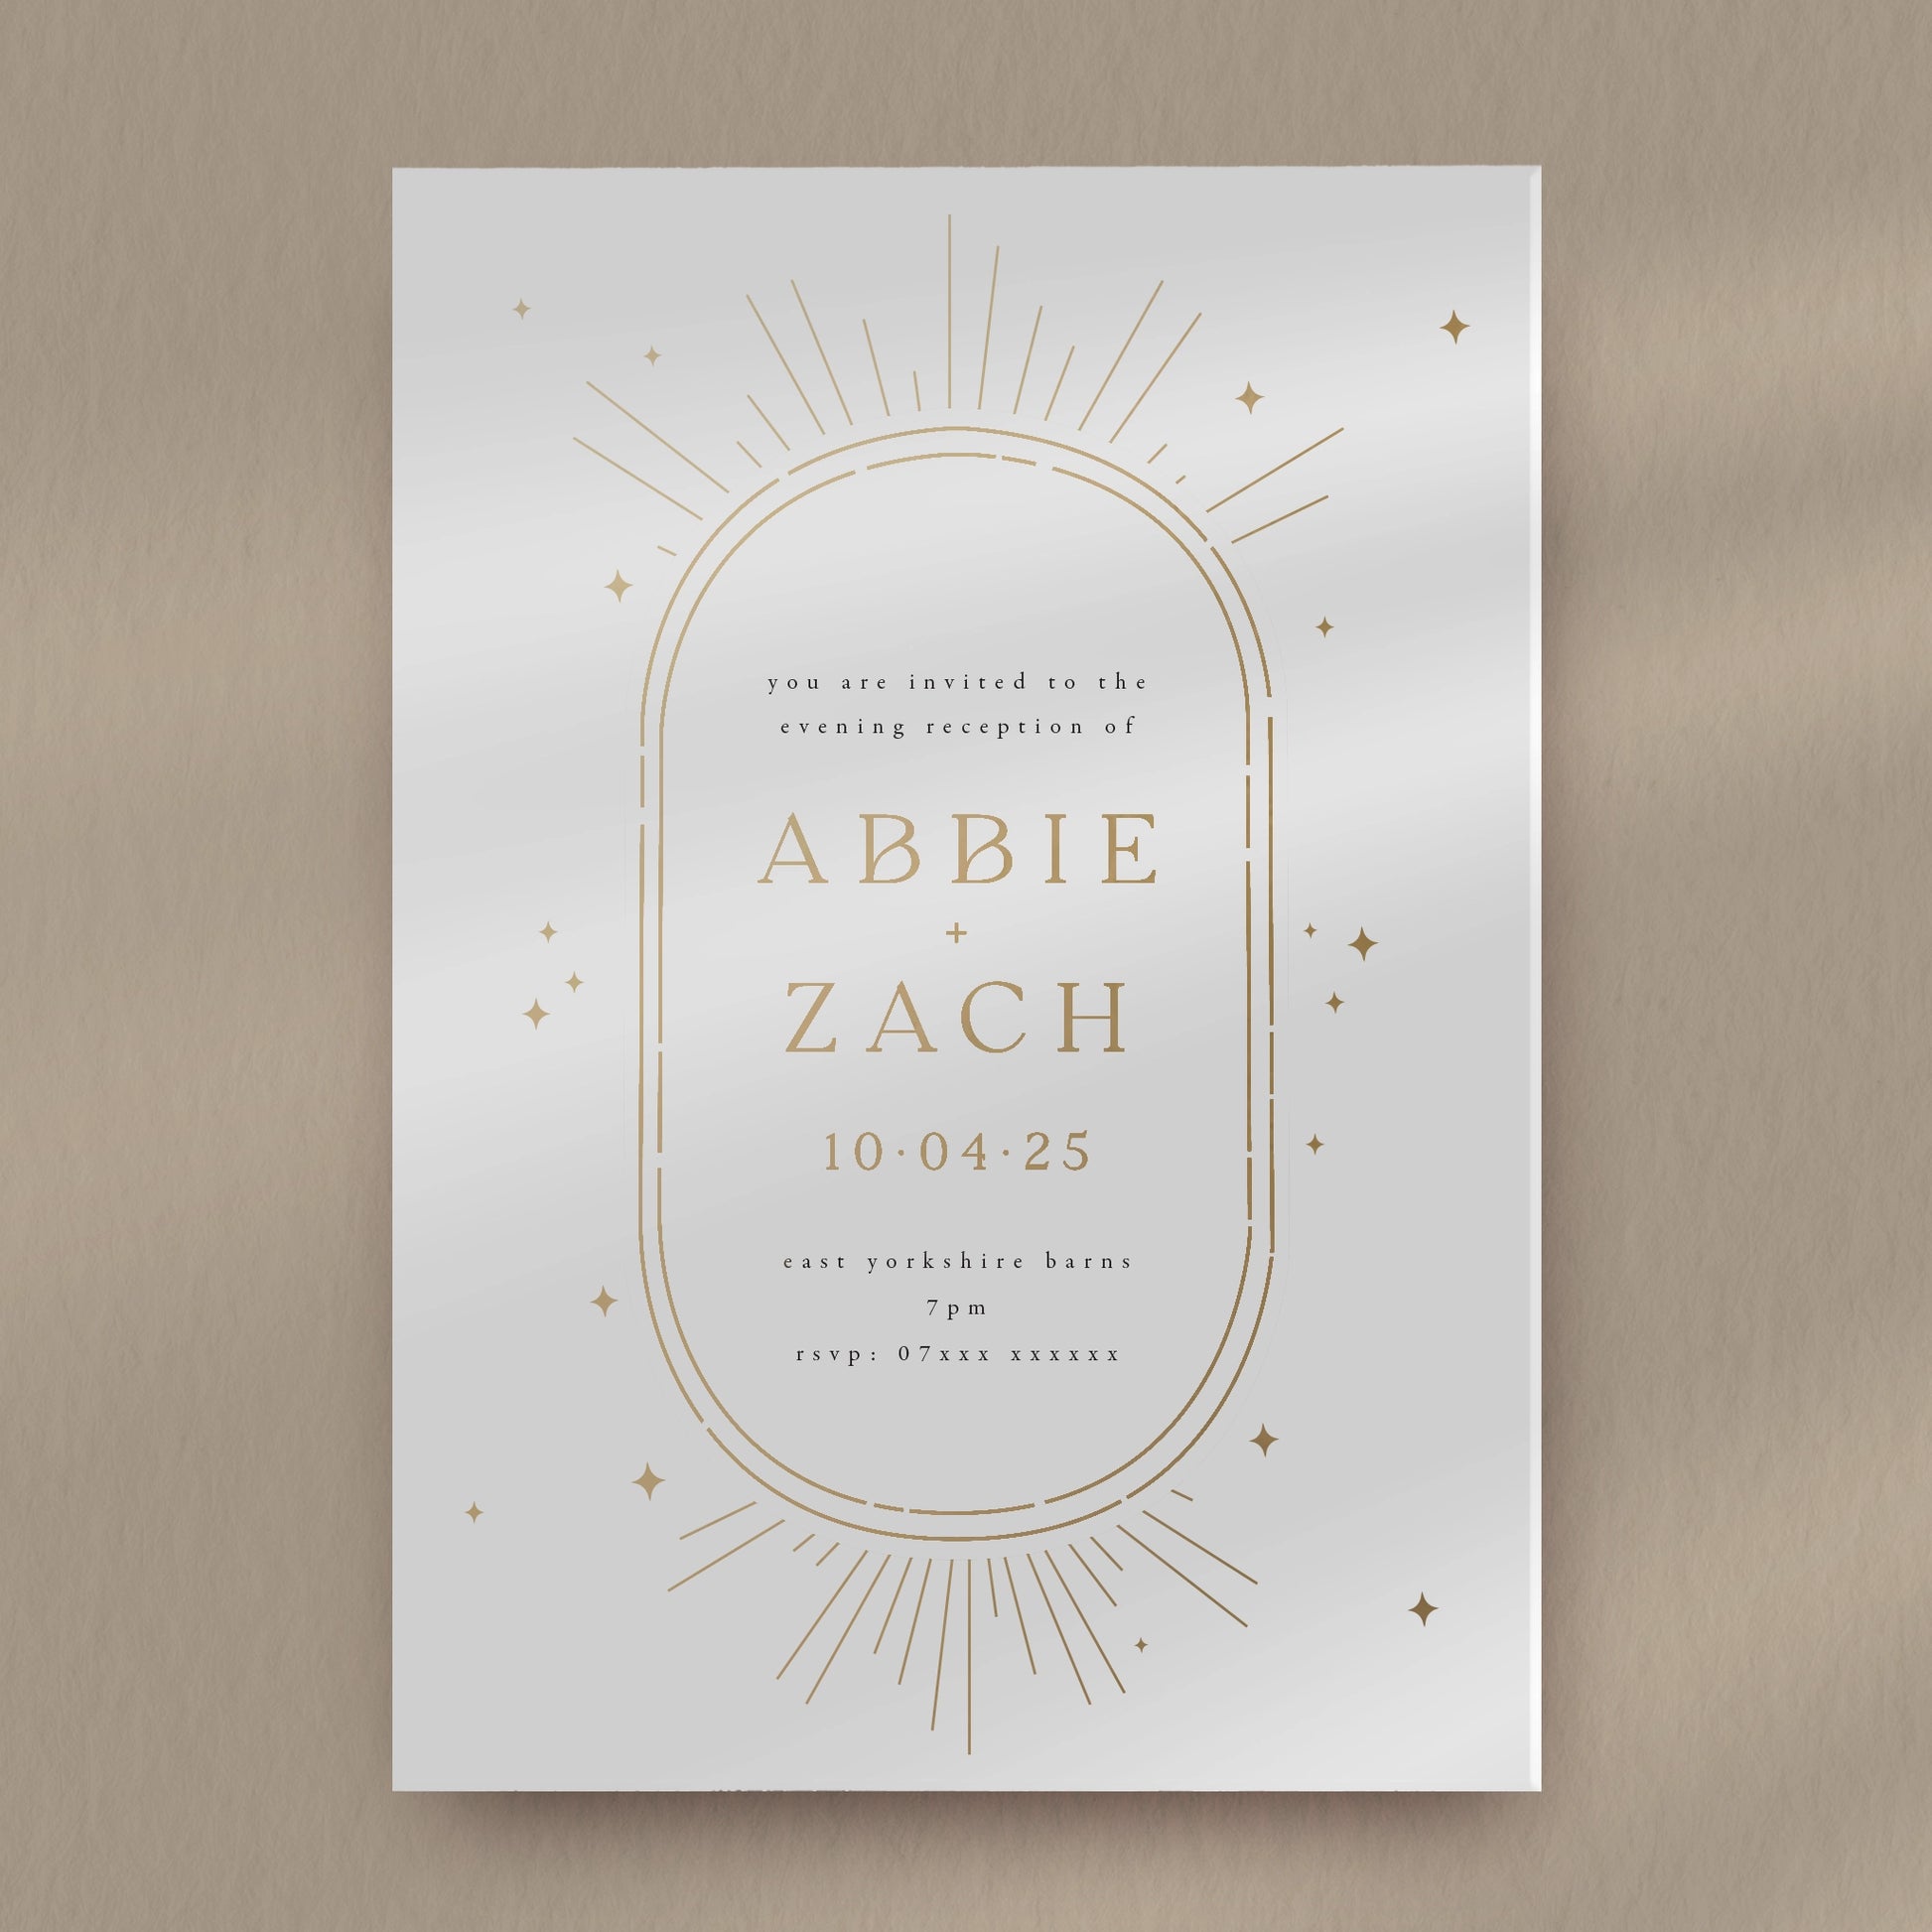 Evening Invitation Sample  Ivy and Gold Wedding Stationery Abbie  